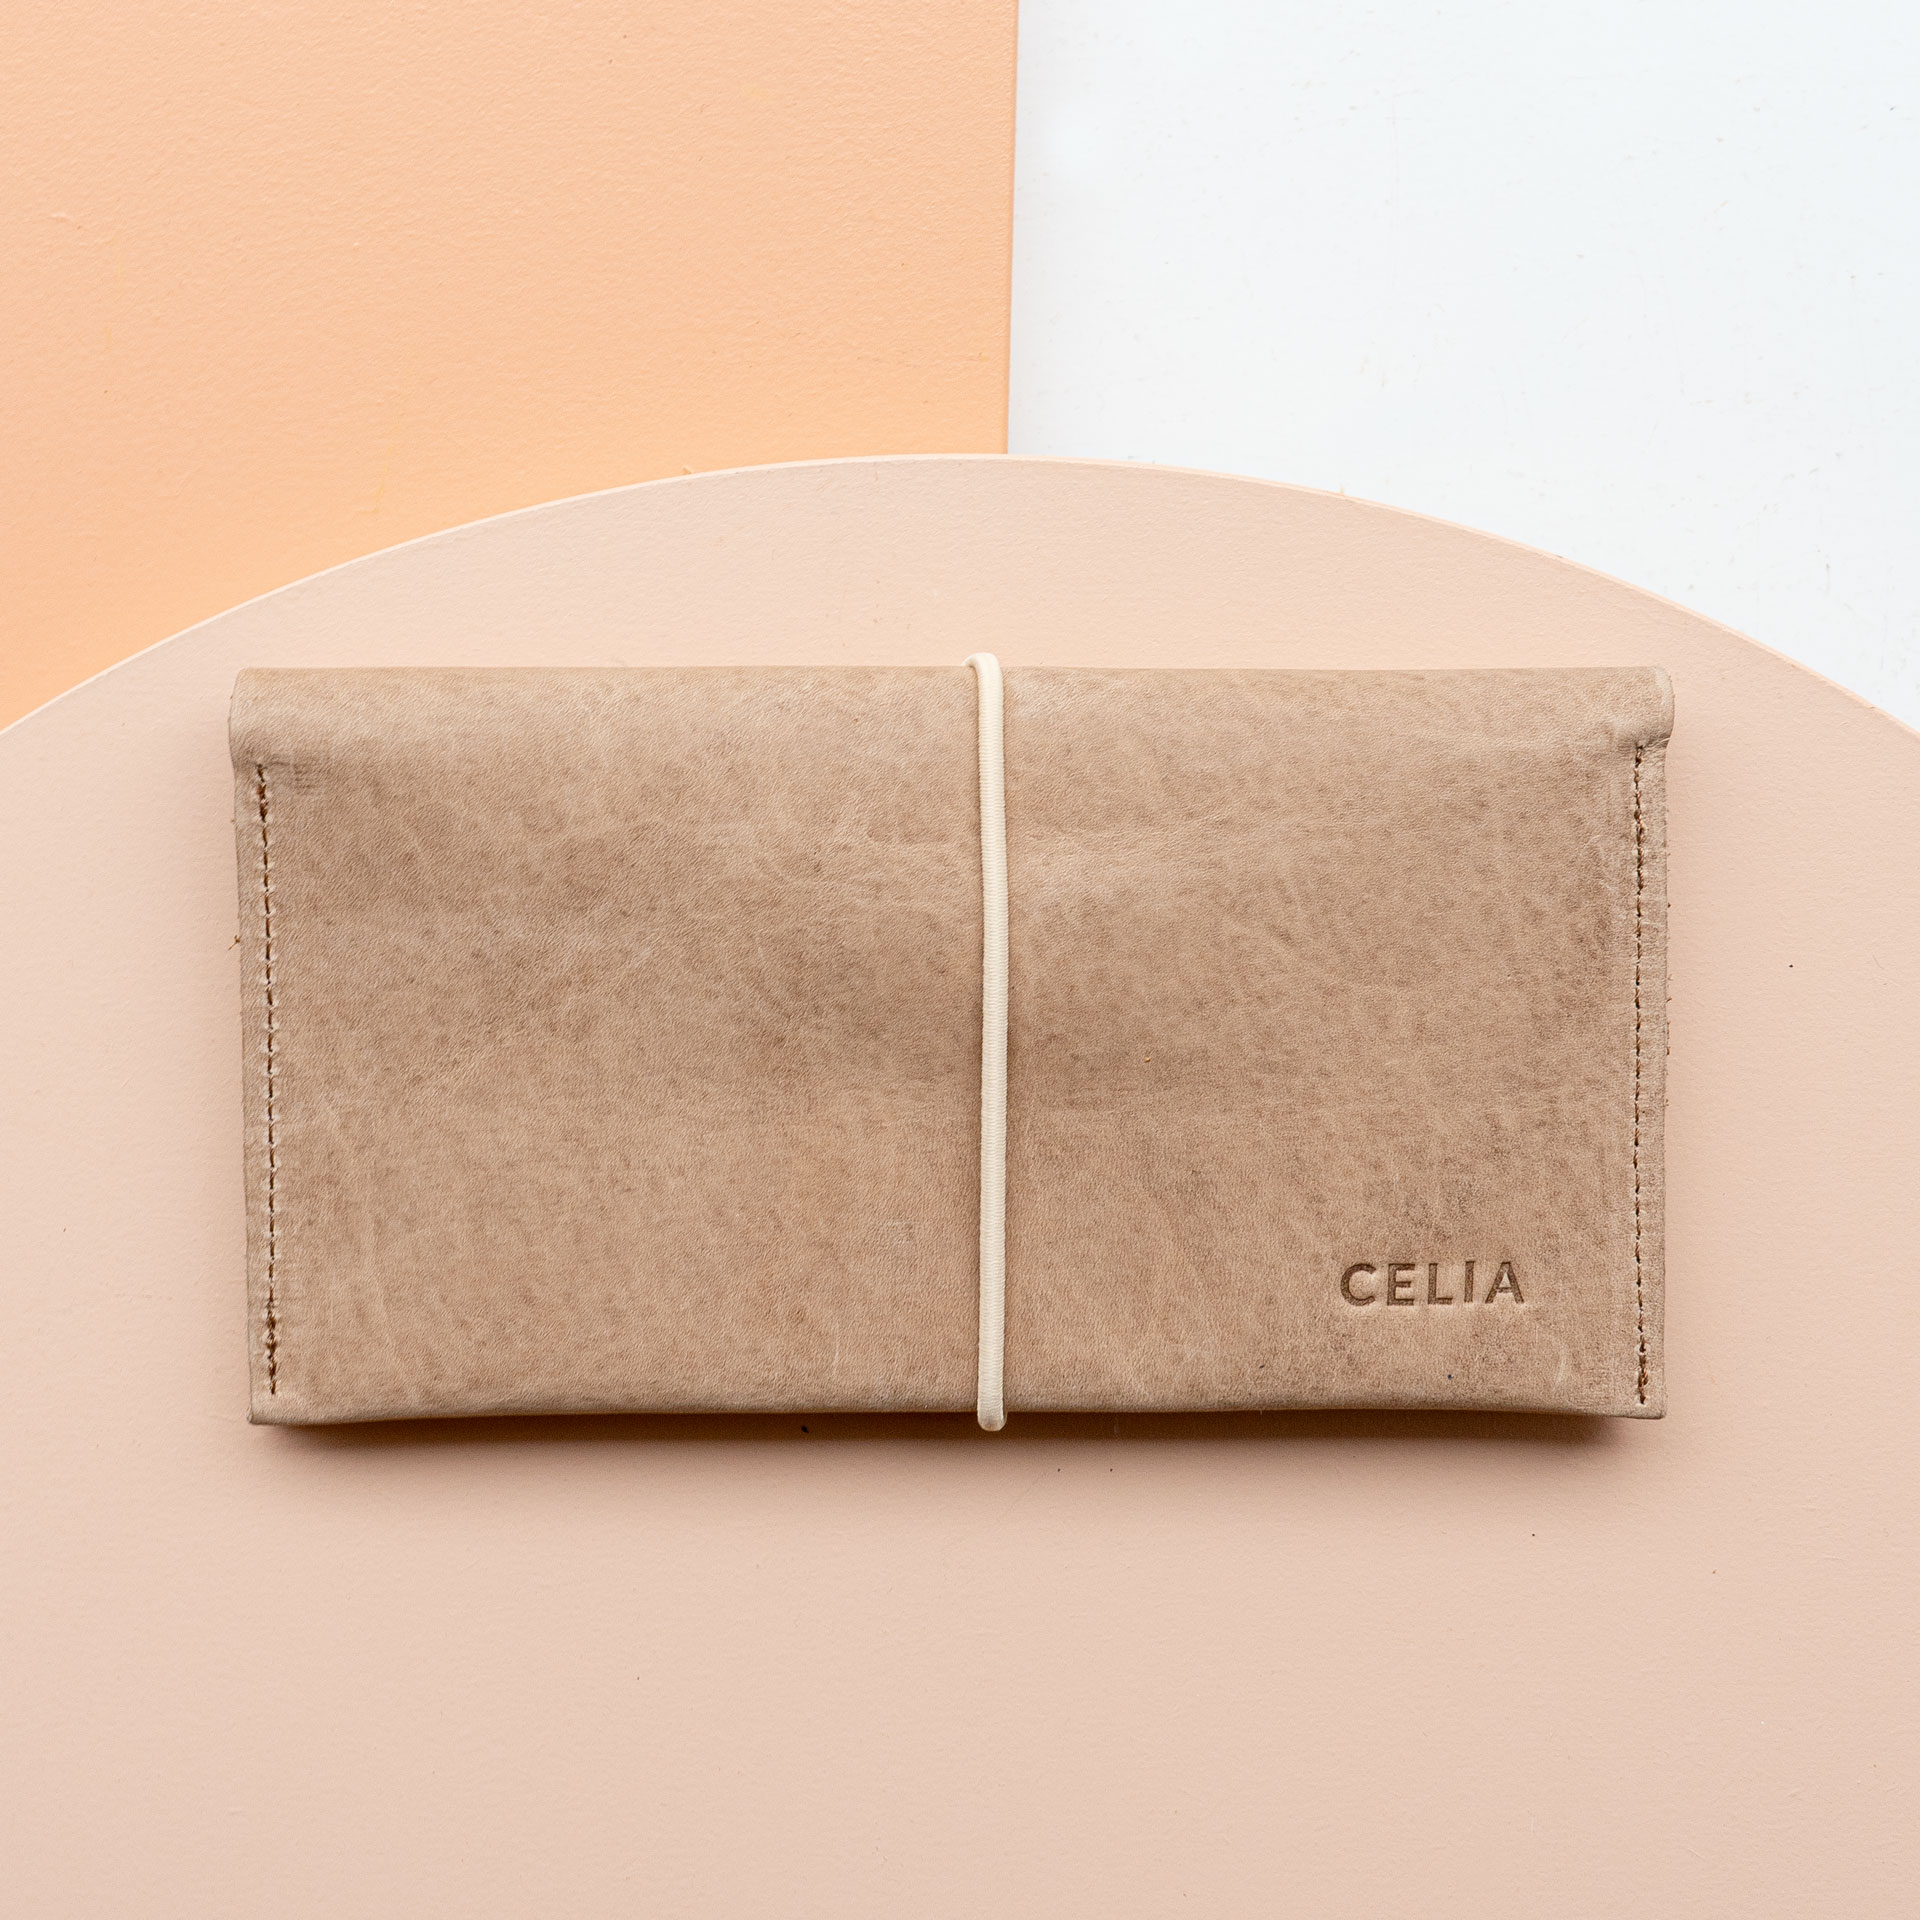 Wallet OLI XLARGE made of sustainable natural leather in light brown with cream-colored closure band and individual embossing 